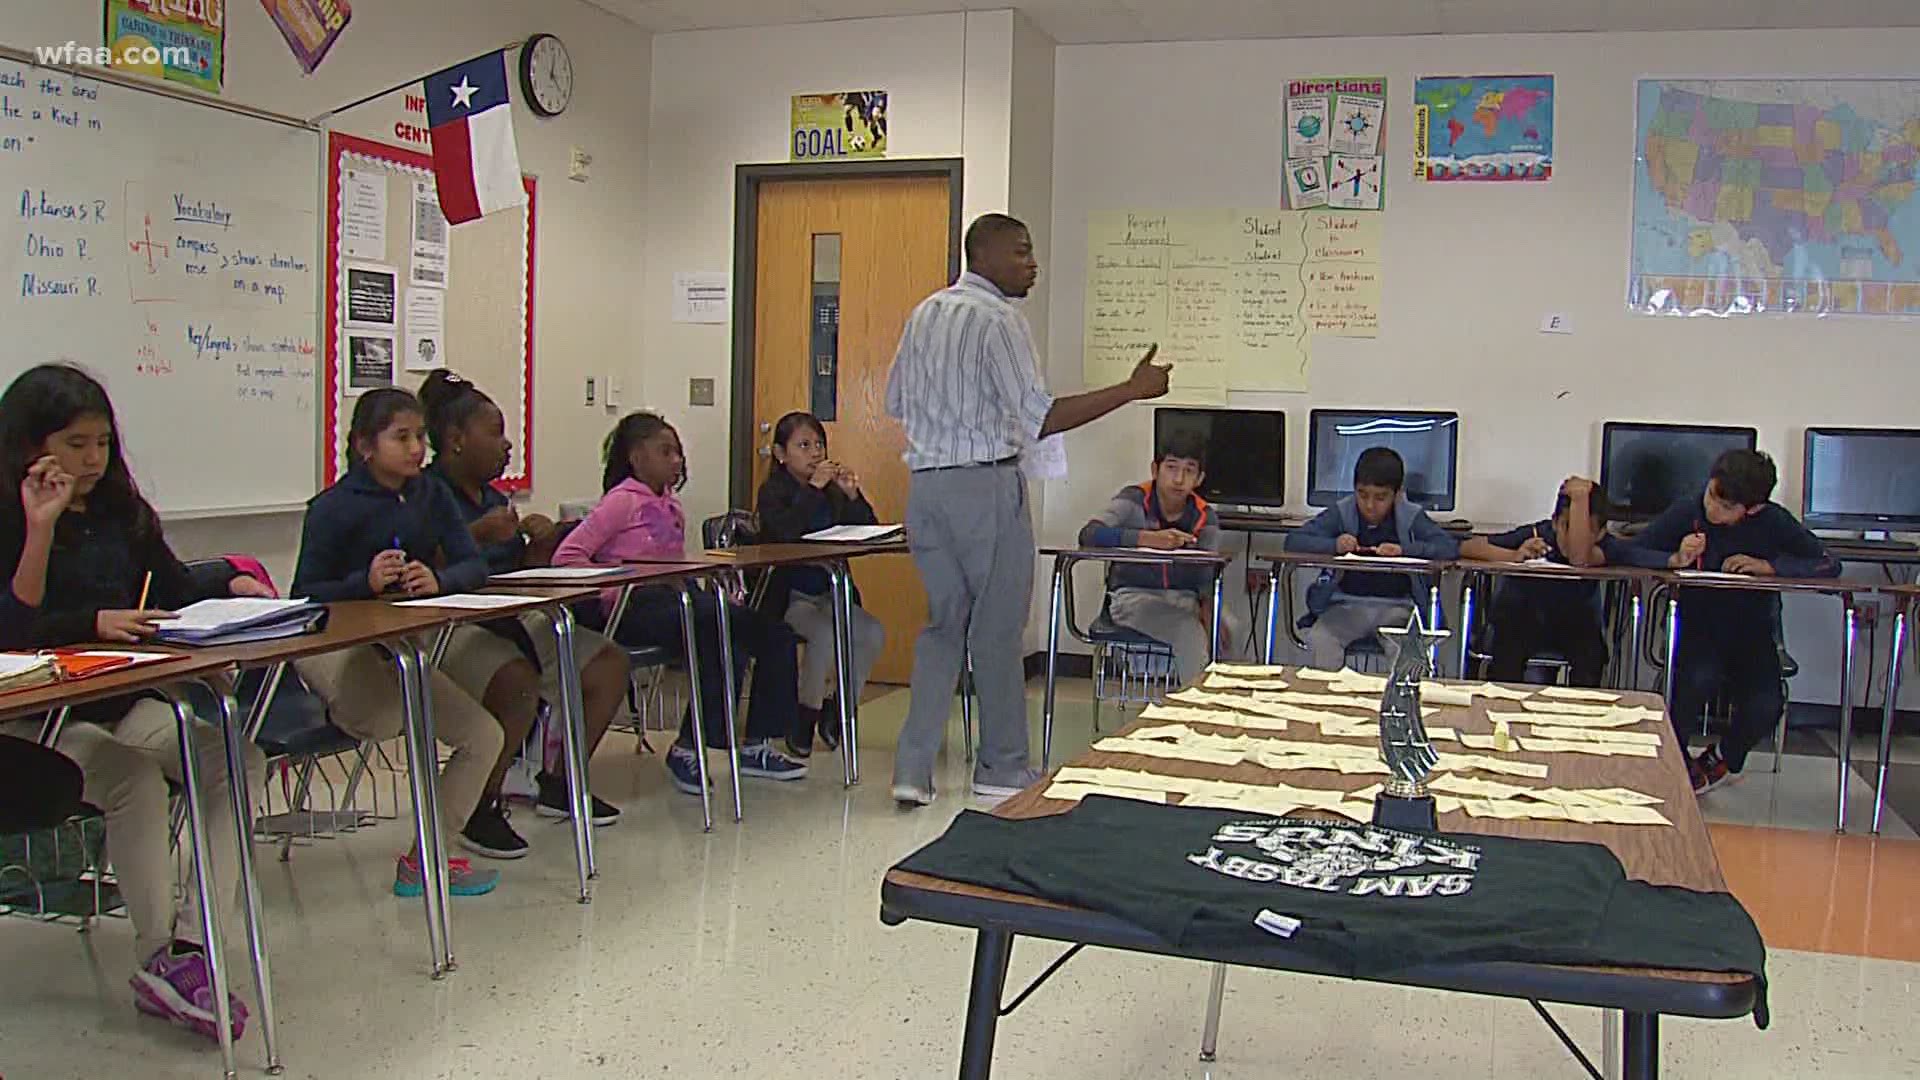 DISD Superintendent Michael Hinojosa has expressed concerns about opening schools on schedule